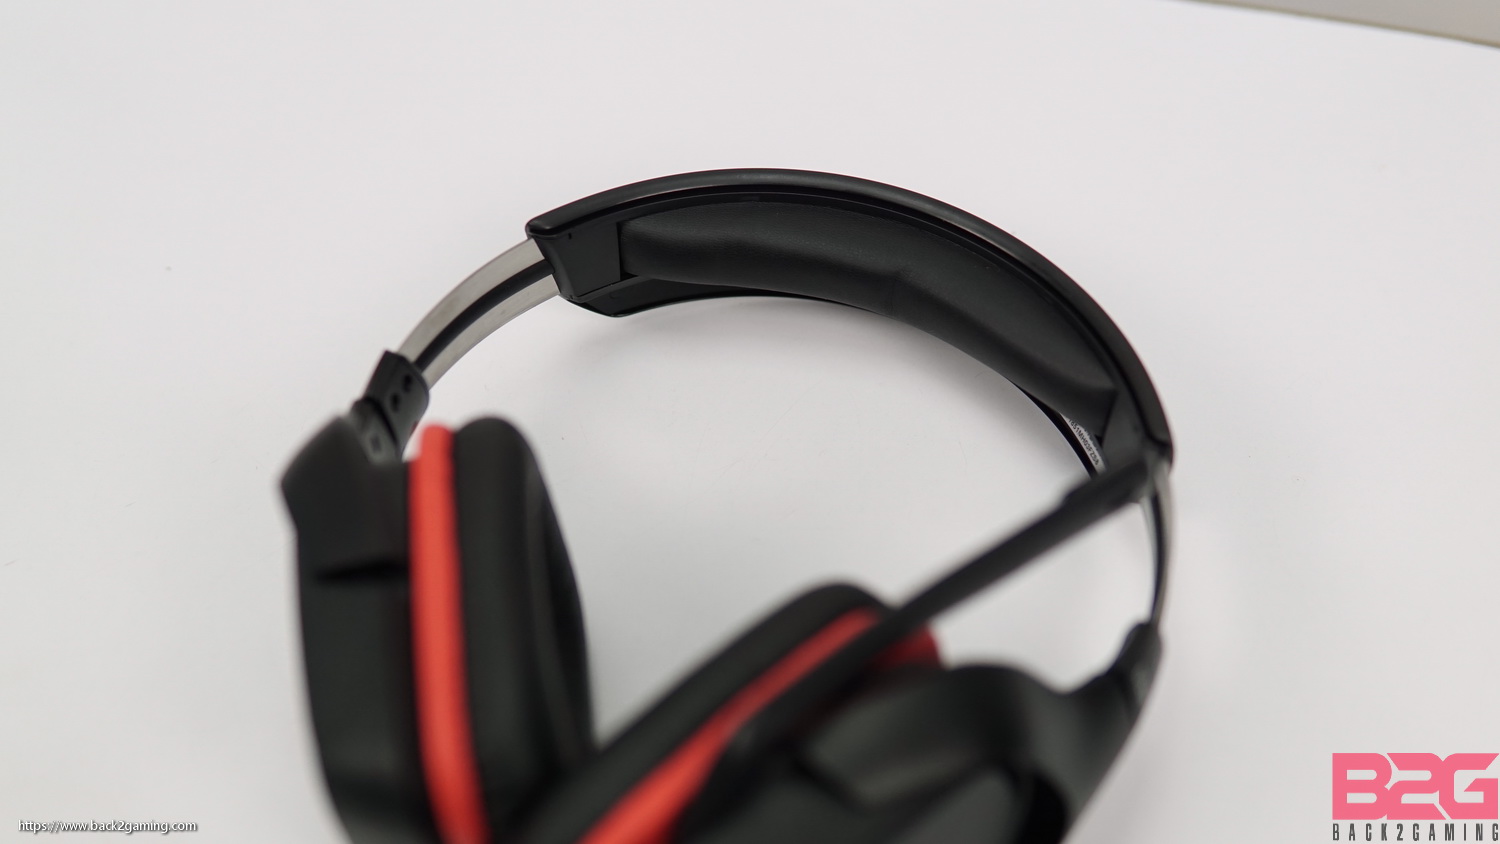 Logitech G331 Gaming Headset Review: Is this a Good Starter Headset? -